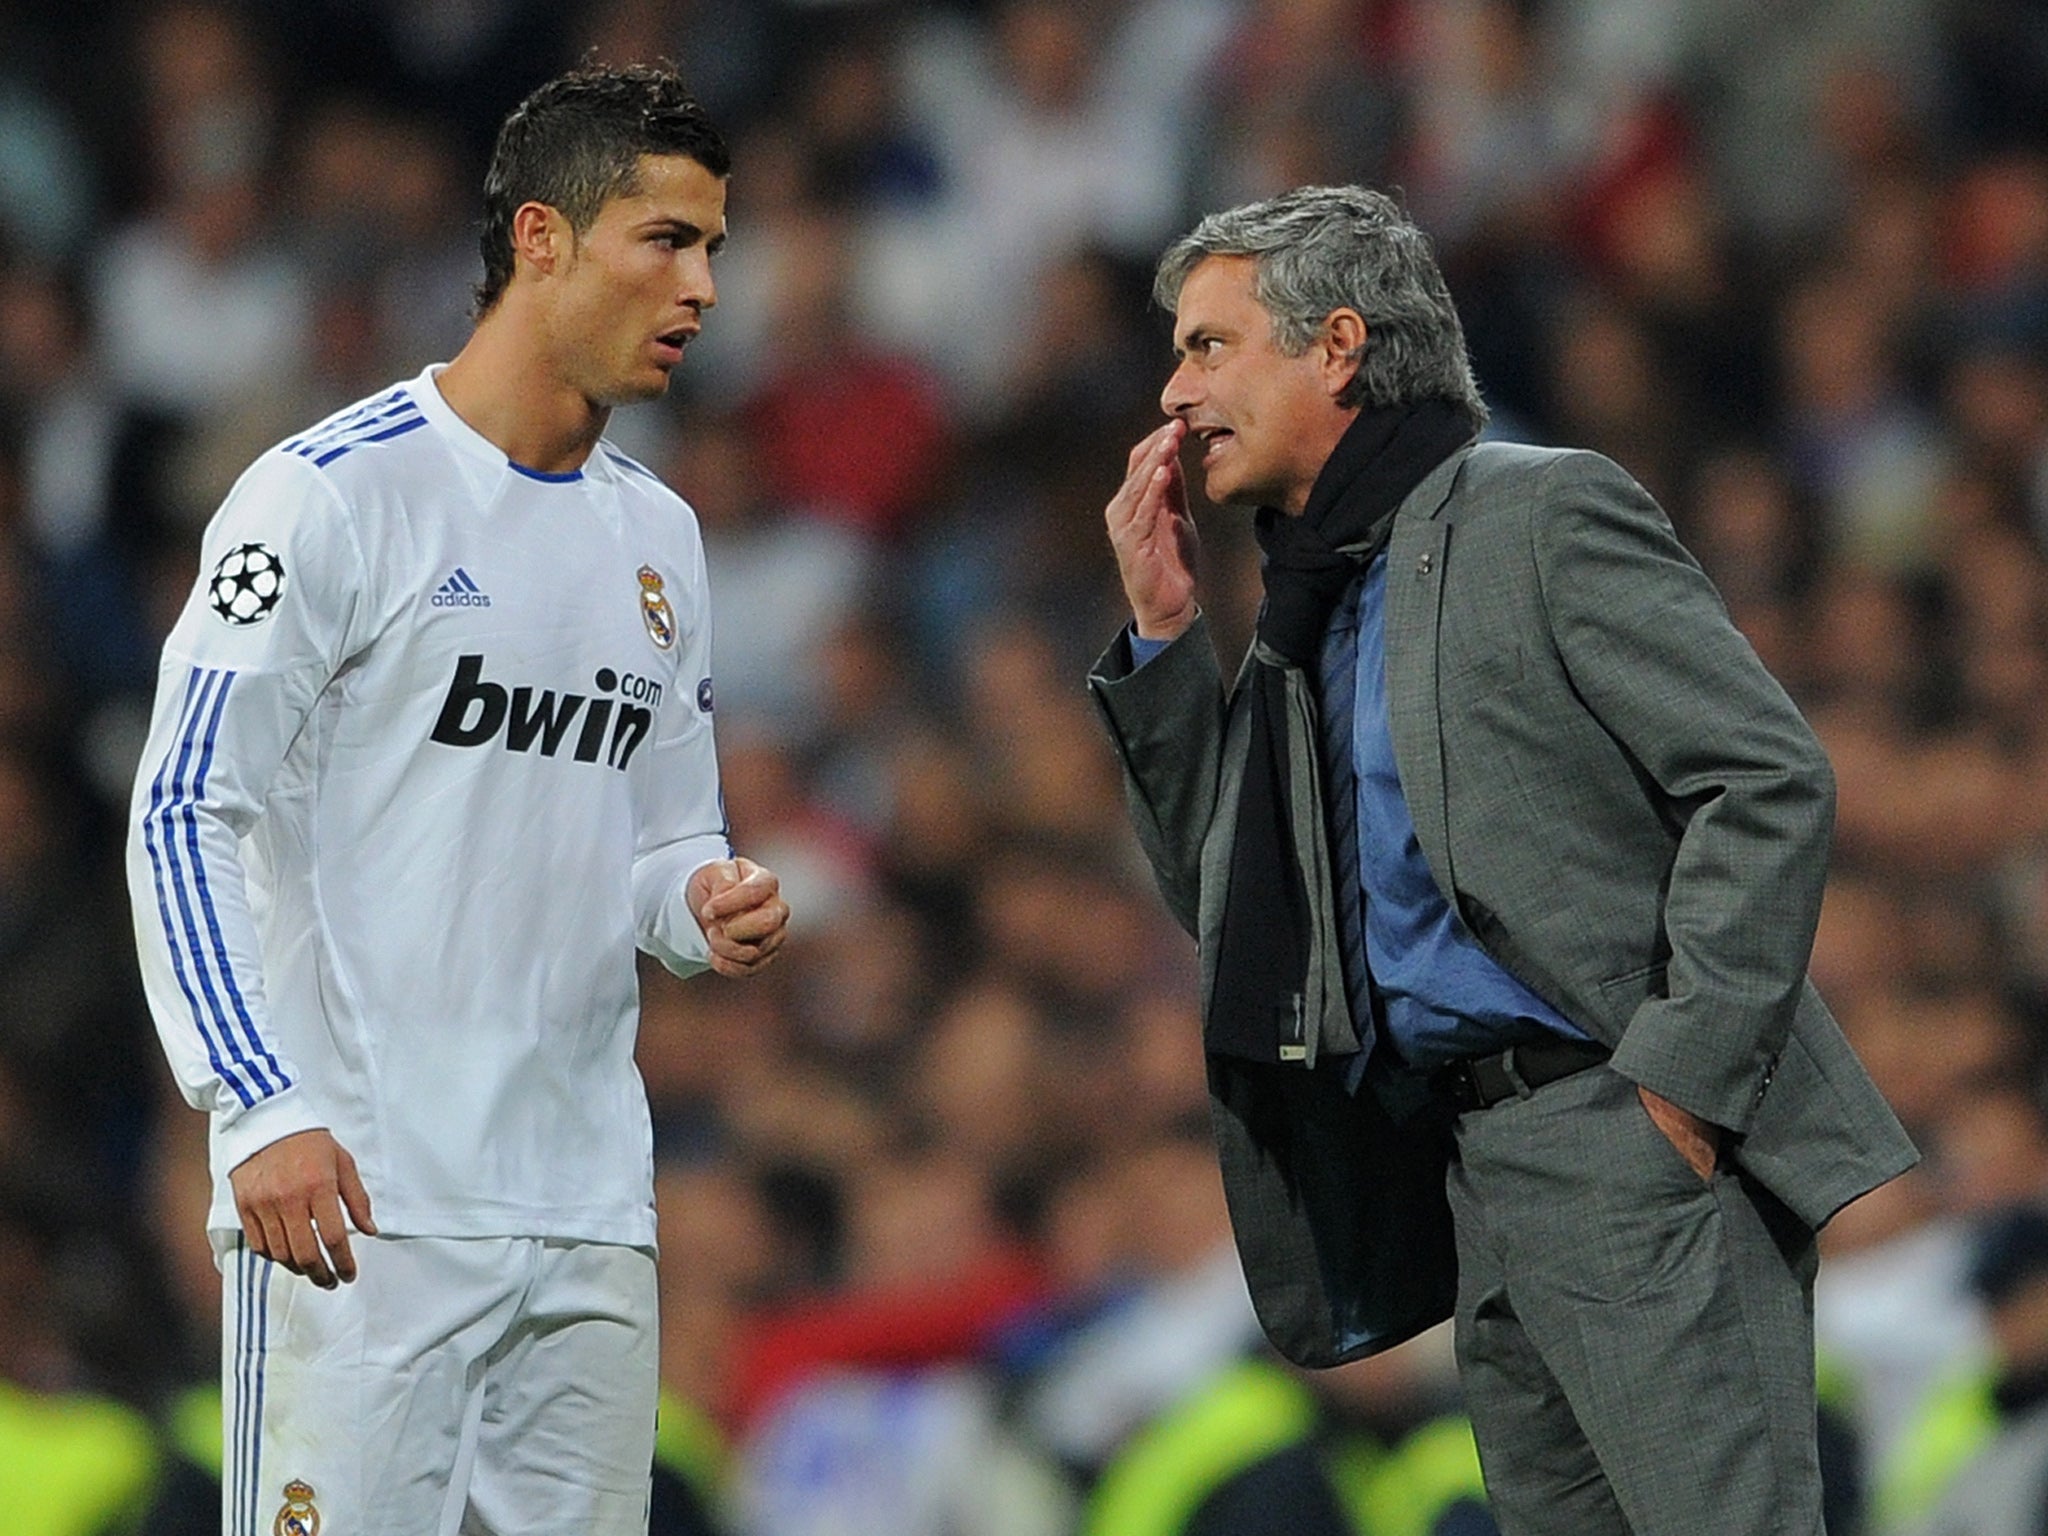 Mourinho and Ronaldo did not always see eye-to-eye at the Bernabeu